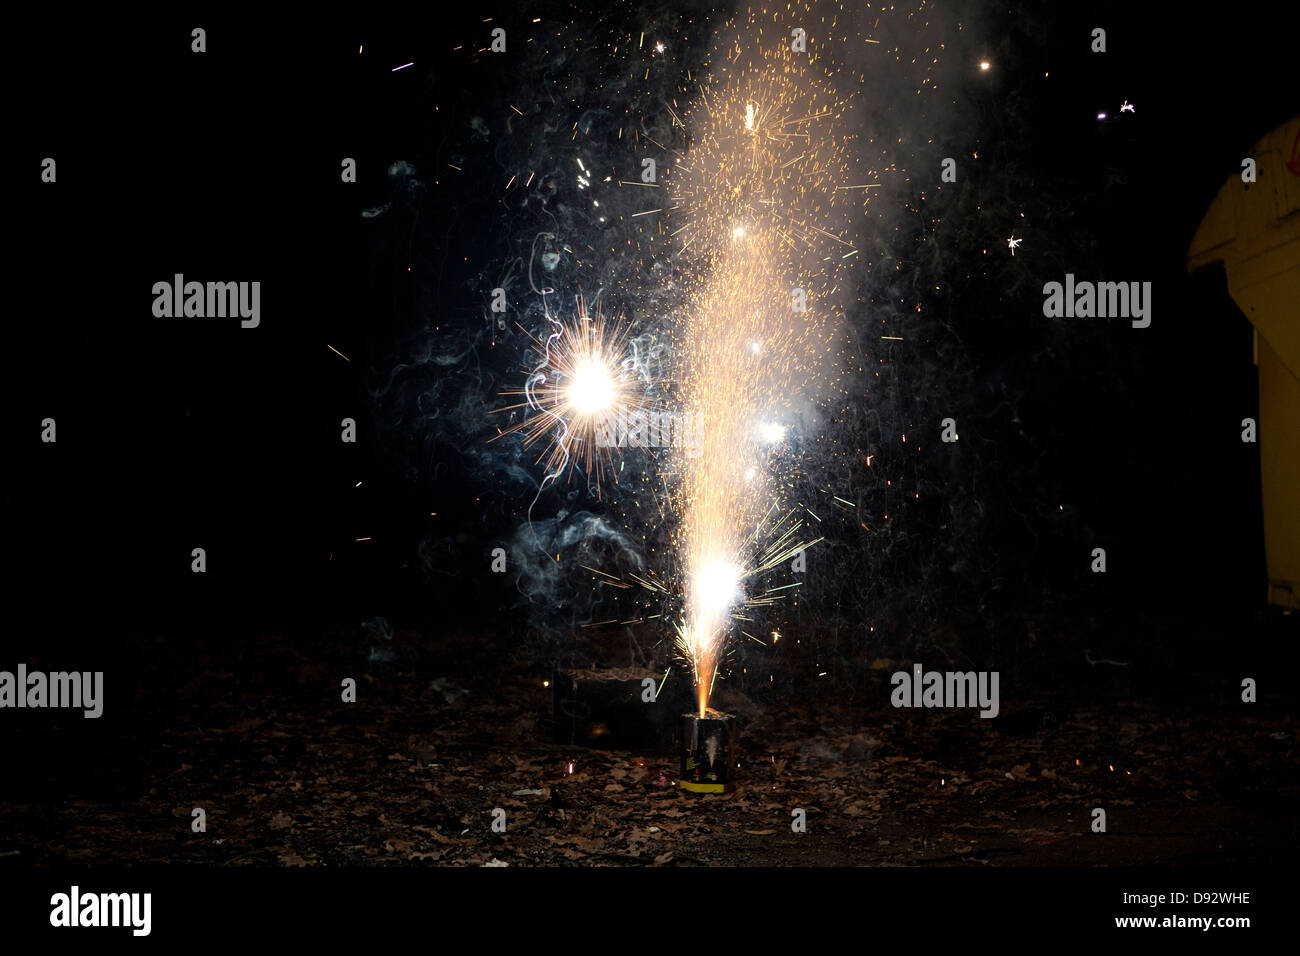 Sparks and smoke coming out of a firework exploding on a sidewalk Stock Photo